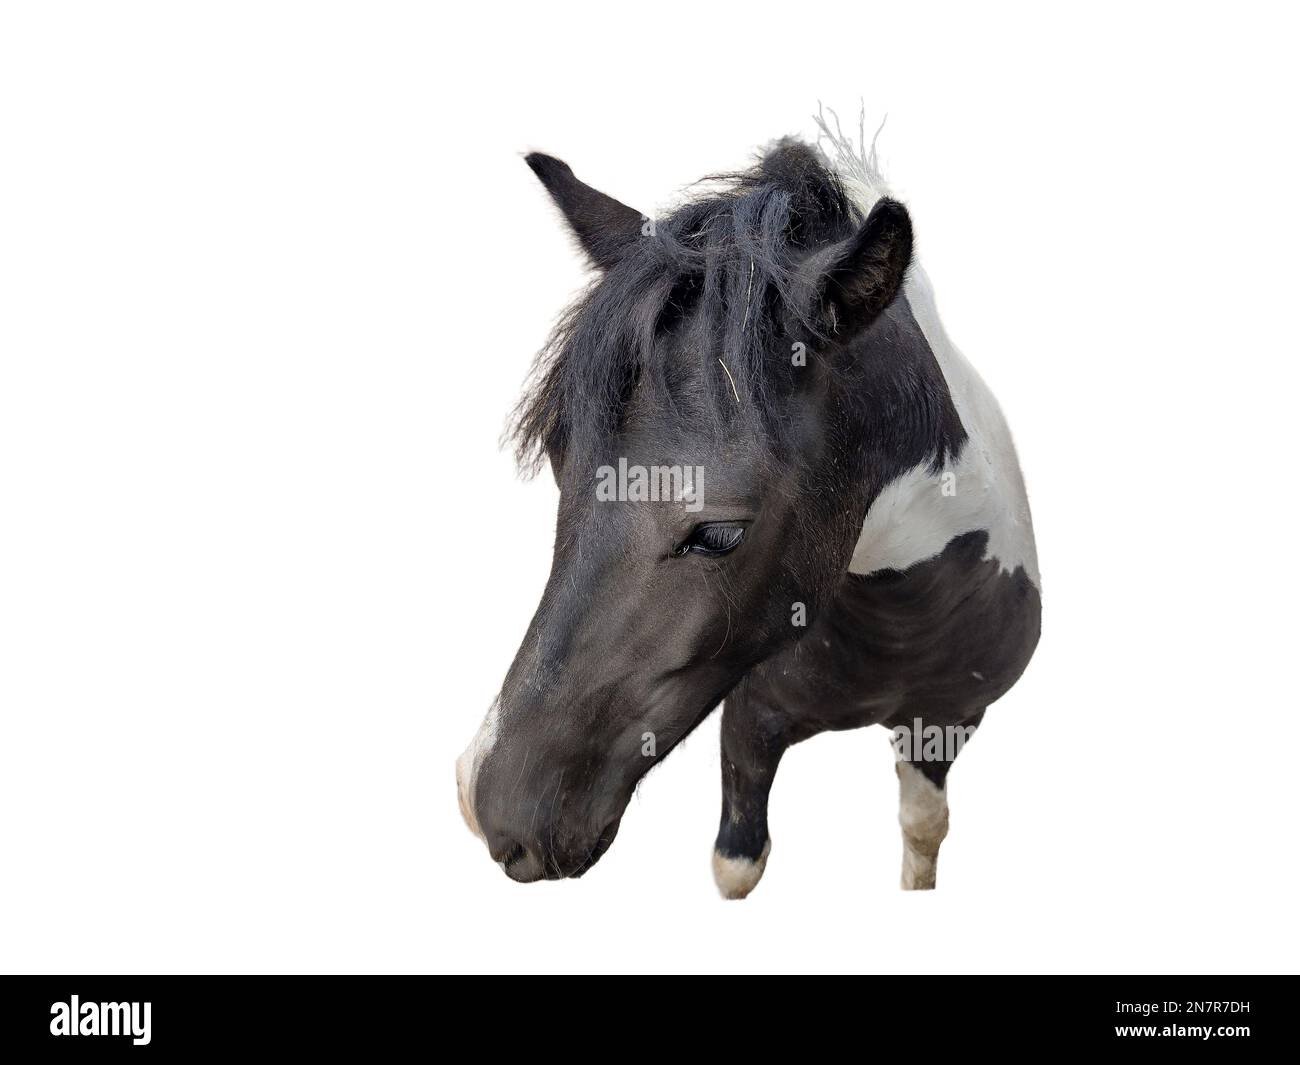 Black horse with white spots. Portrait of a horse Stock Photo